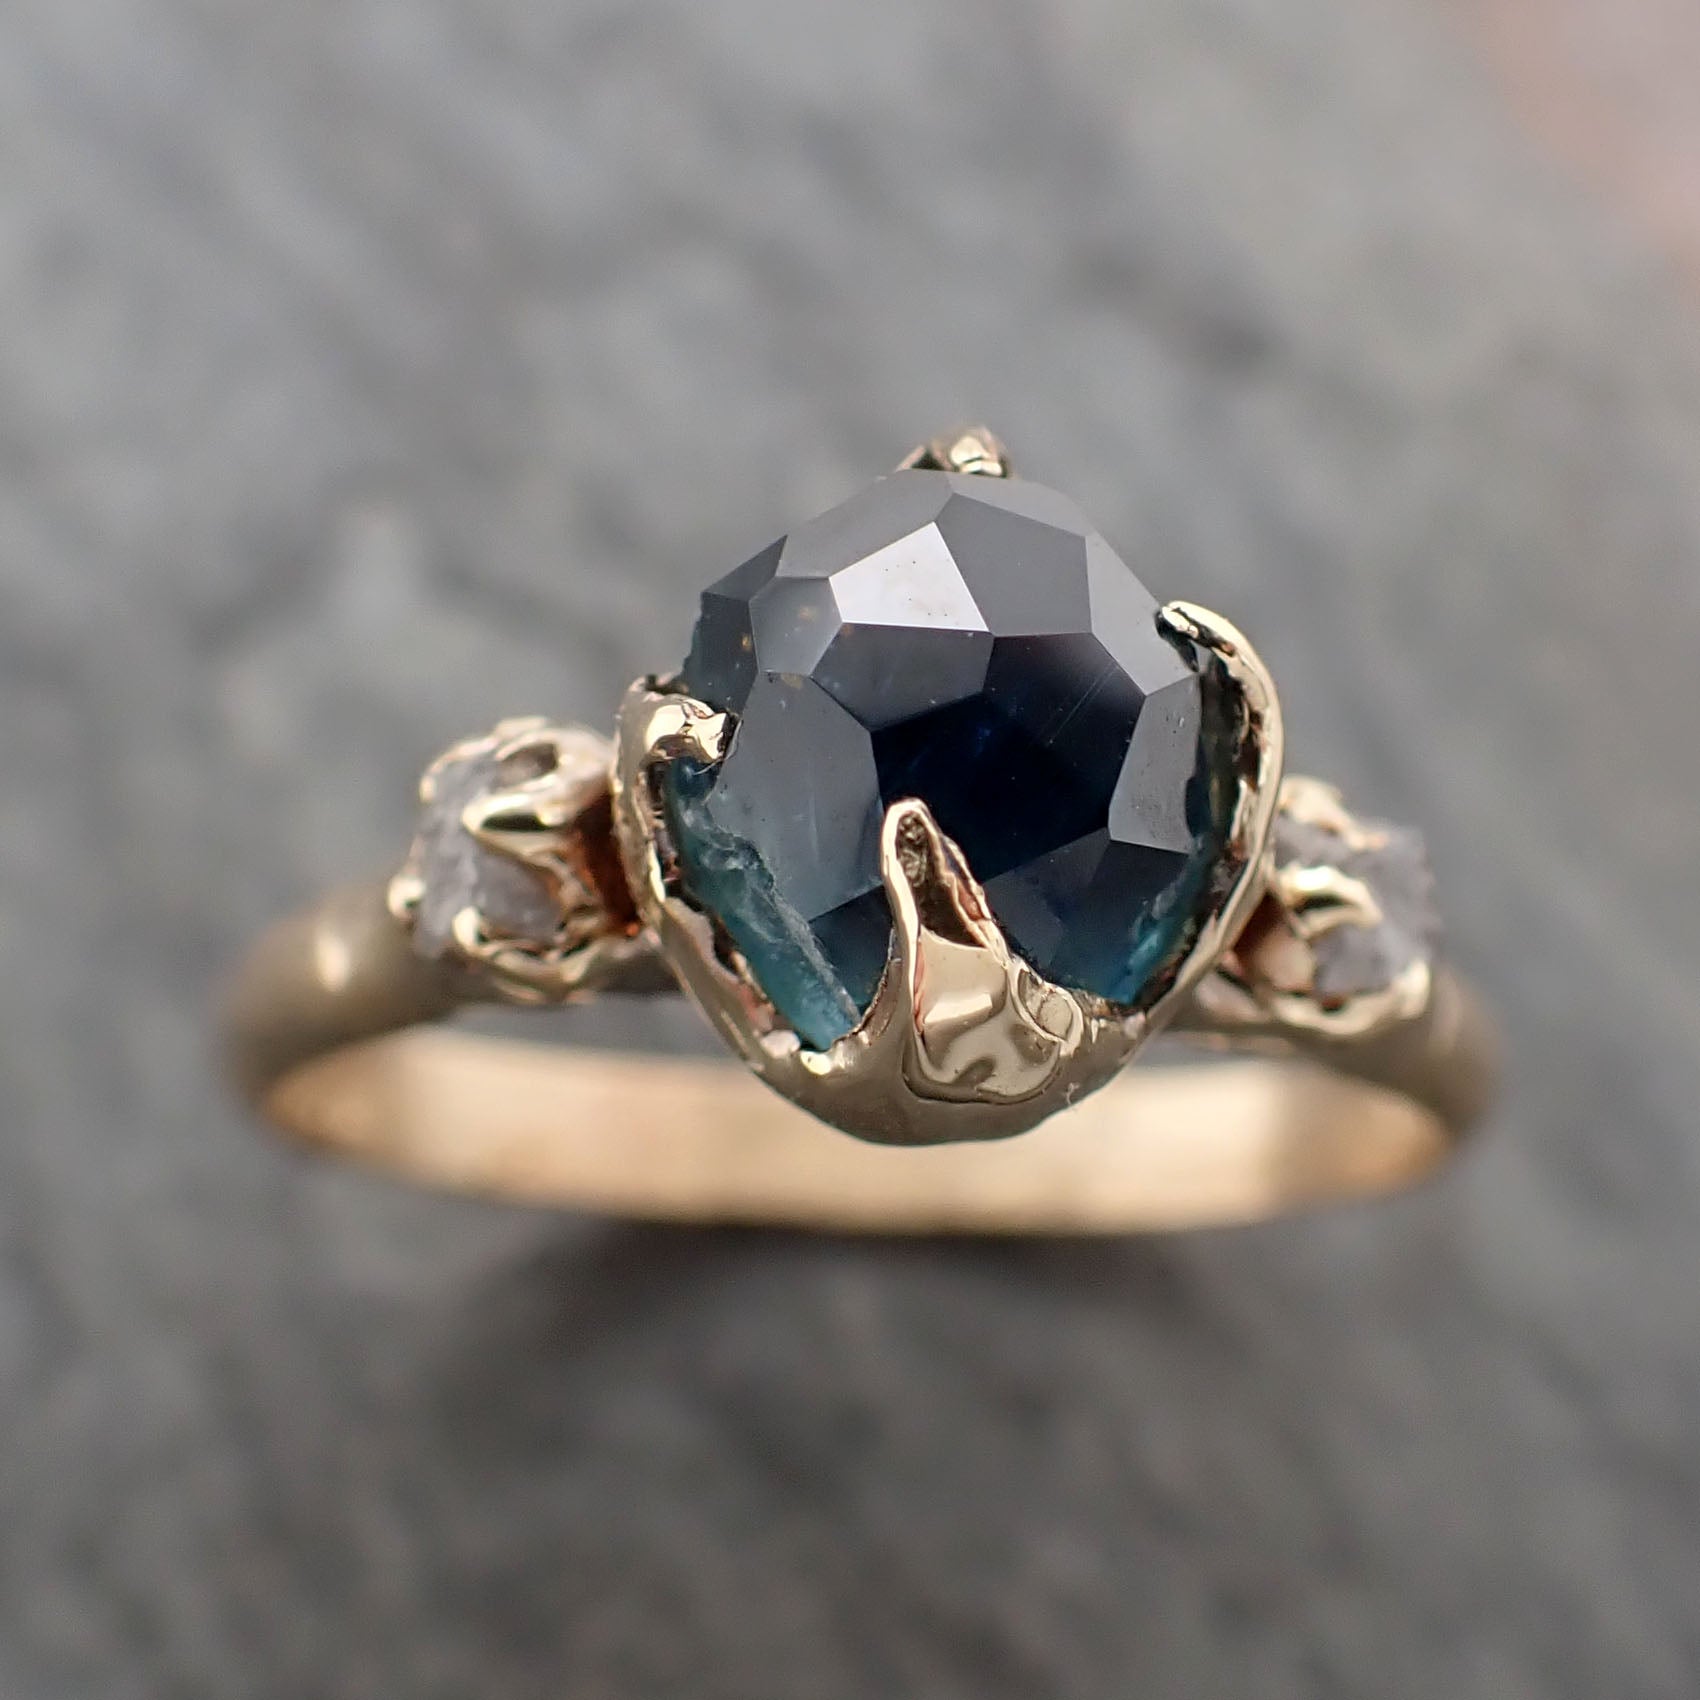 partially faceted blue montana sapphire diamond 18k yellow gold engagement ring wedding ring custom one of a kind blue gemstone ring multi stone ring 2353 Alternative Engagement